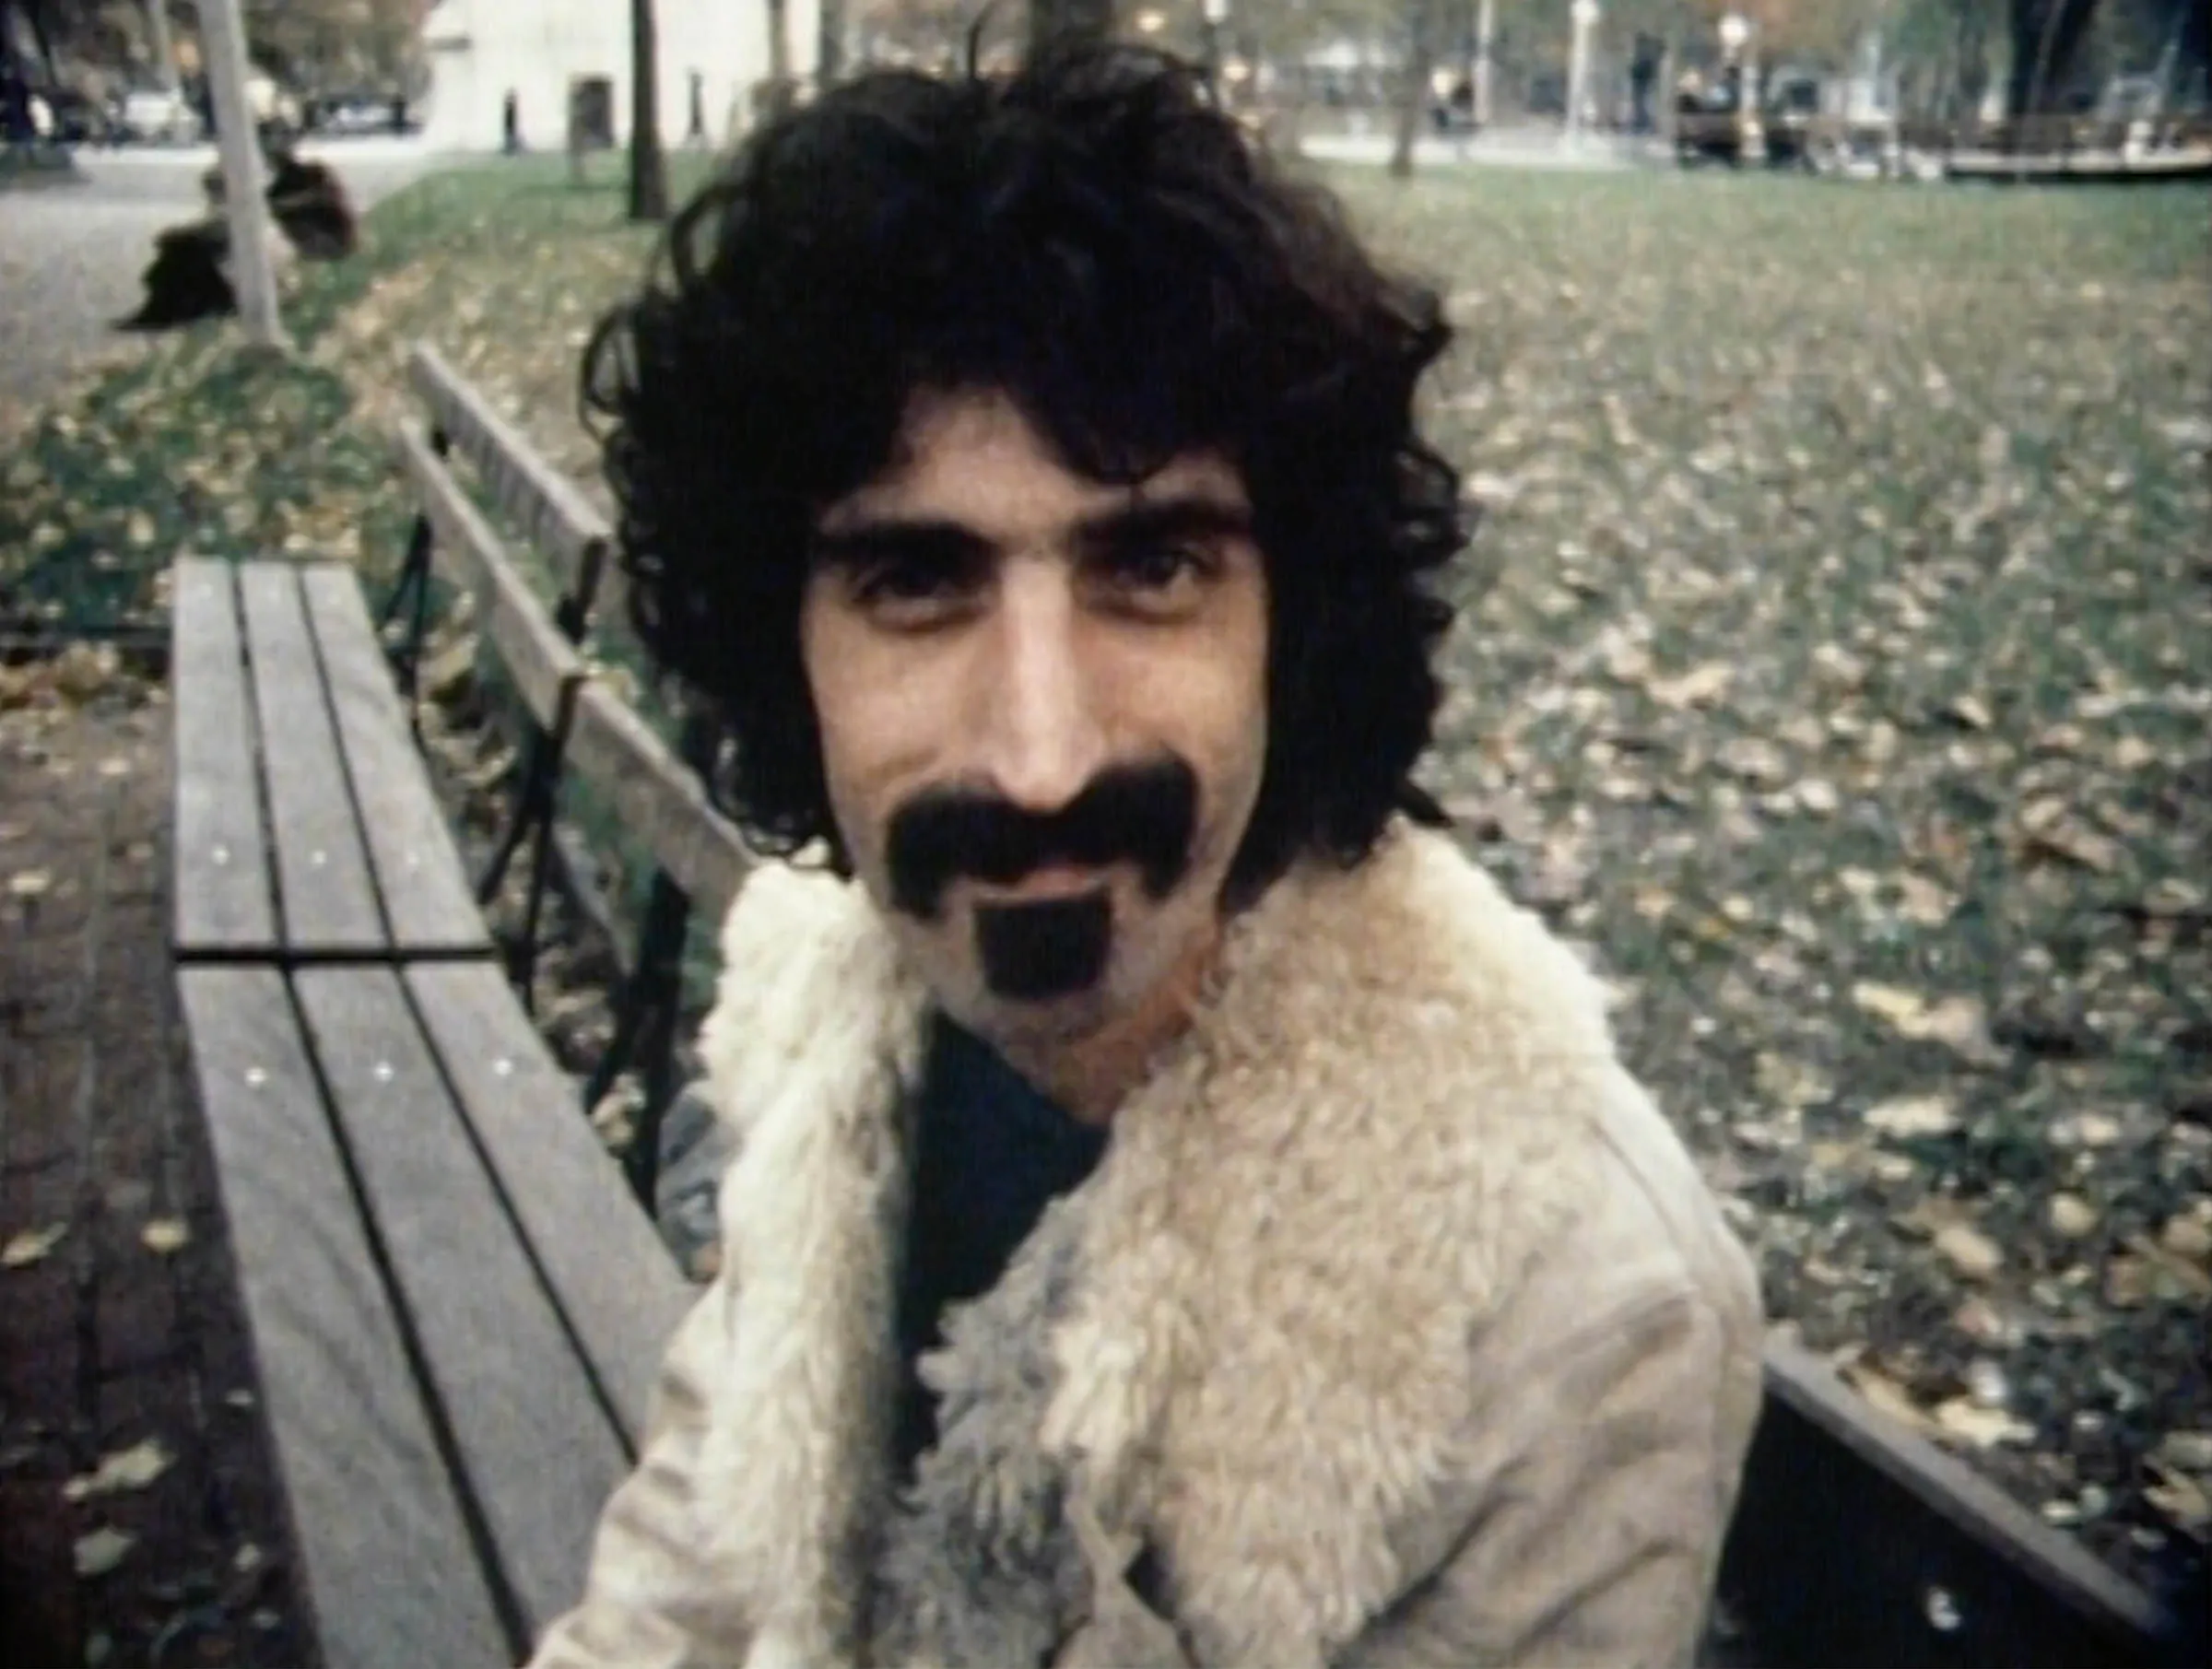 WATCH the official trailer for ZAPPA, directed by Alex Winter